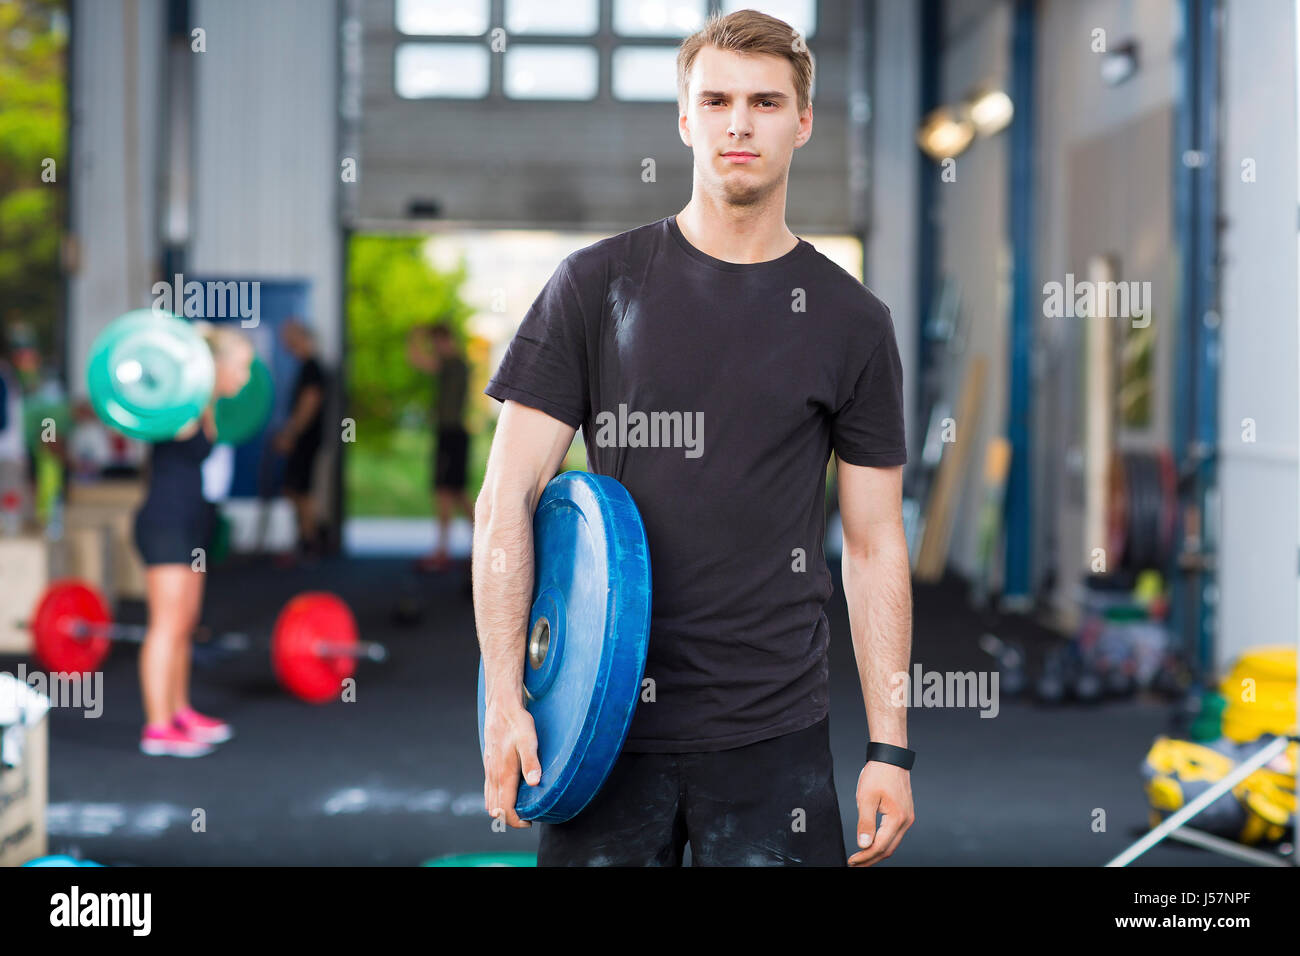 Determined Athlete Carrying Weight Plate In Health Club Stock Photo